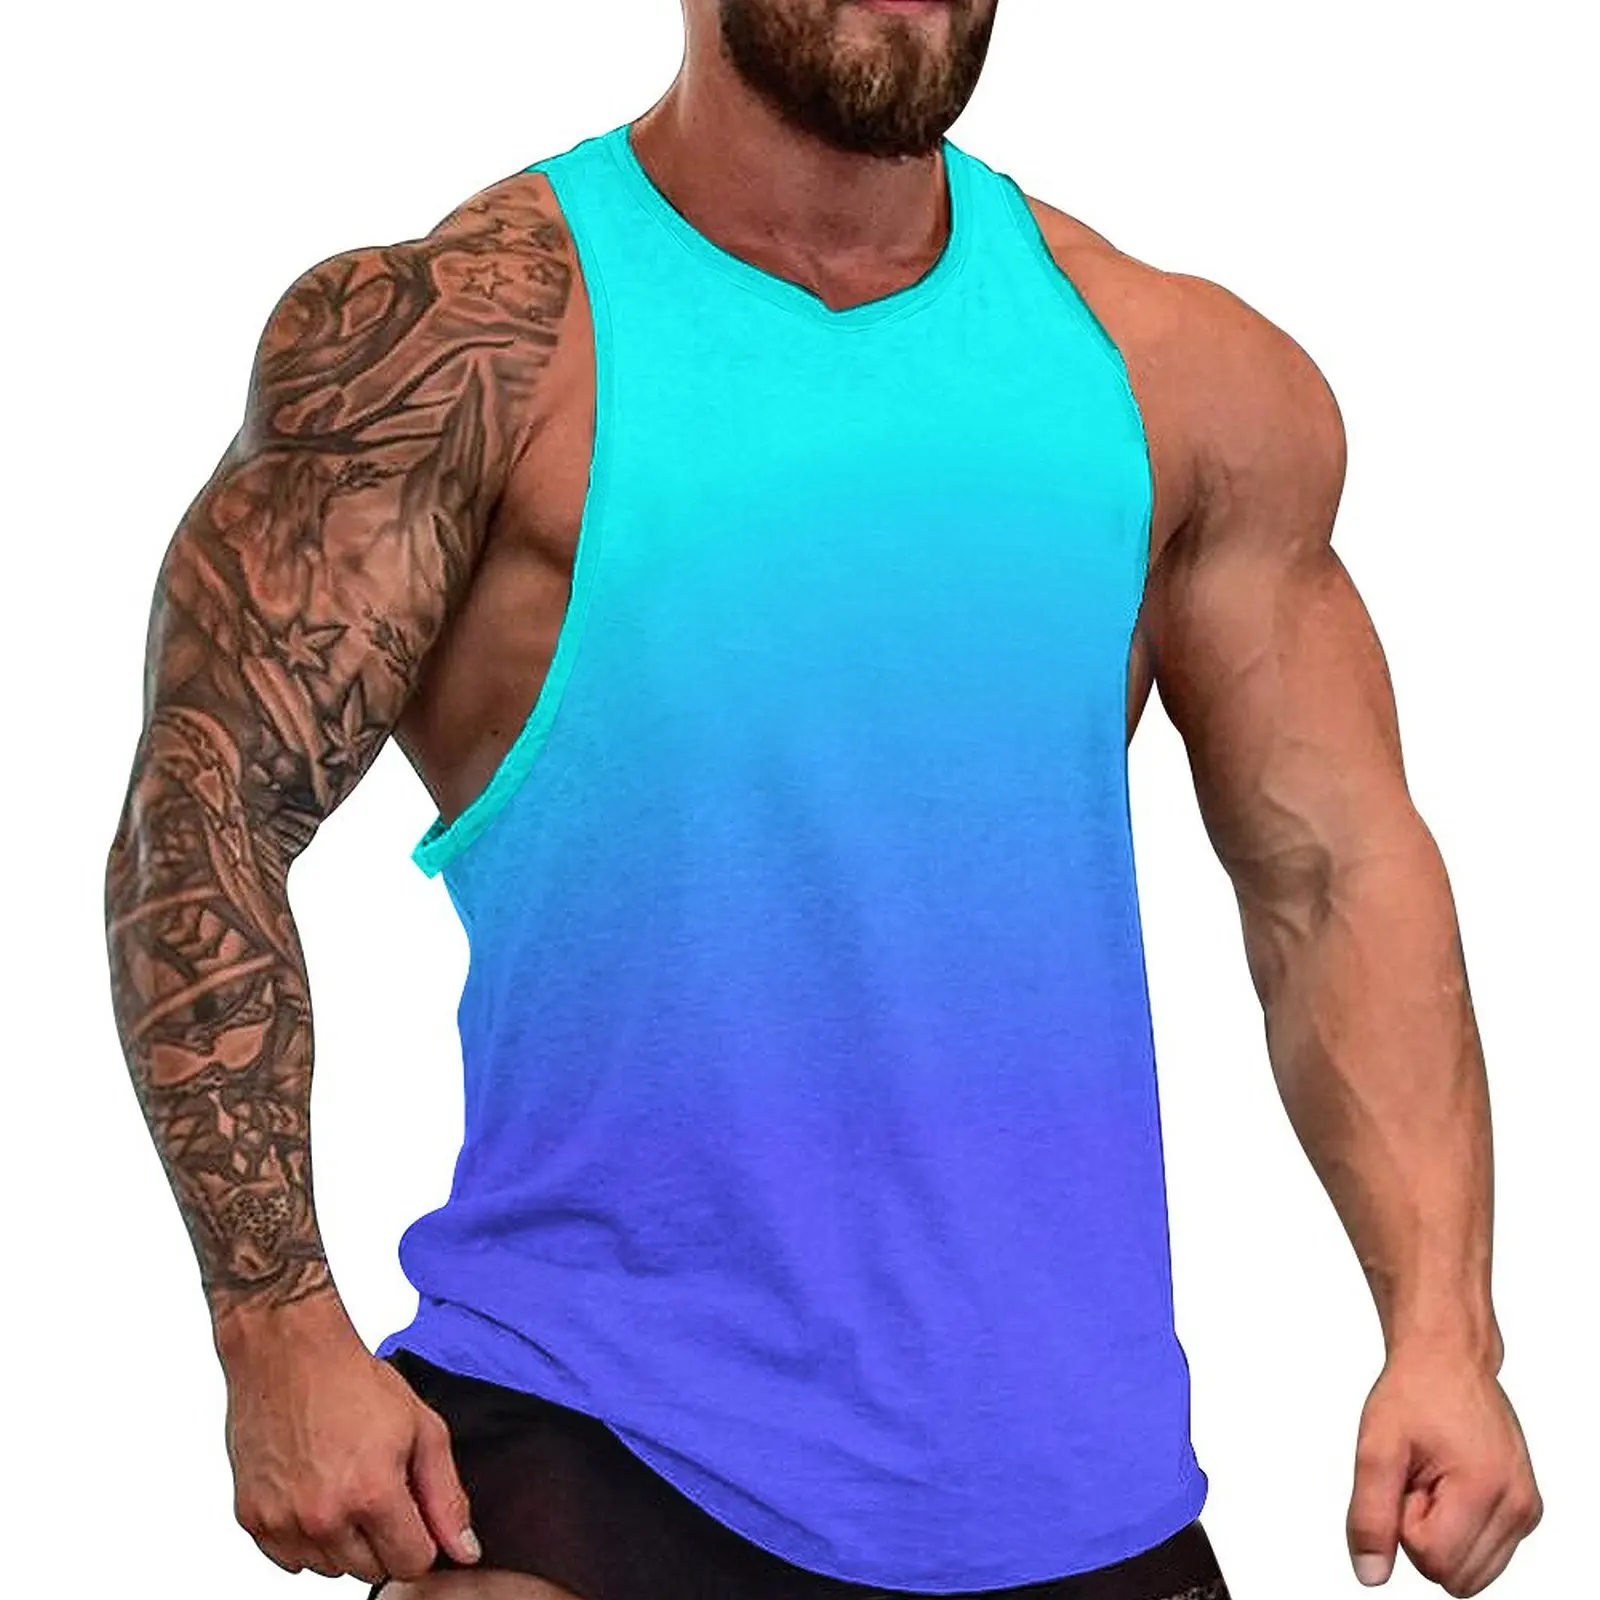 

Ombre Print Tank Top Male Neon Blue Fashion Tops Daily Bodybuilding Custom Sleeveless Vests Plus Size 4XL 5XL